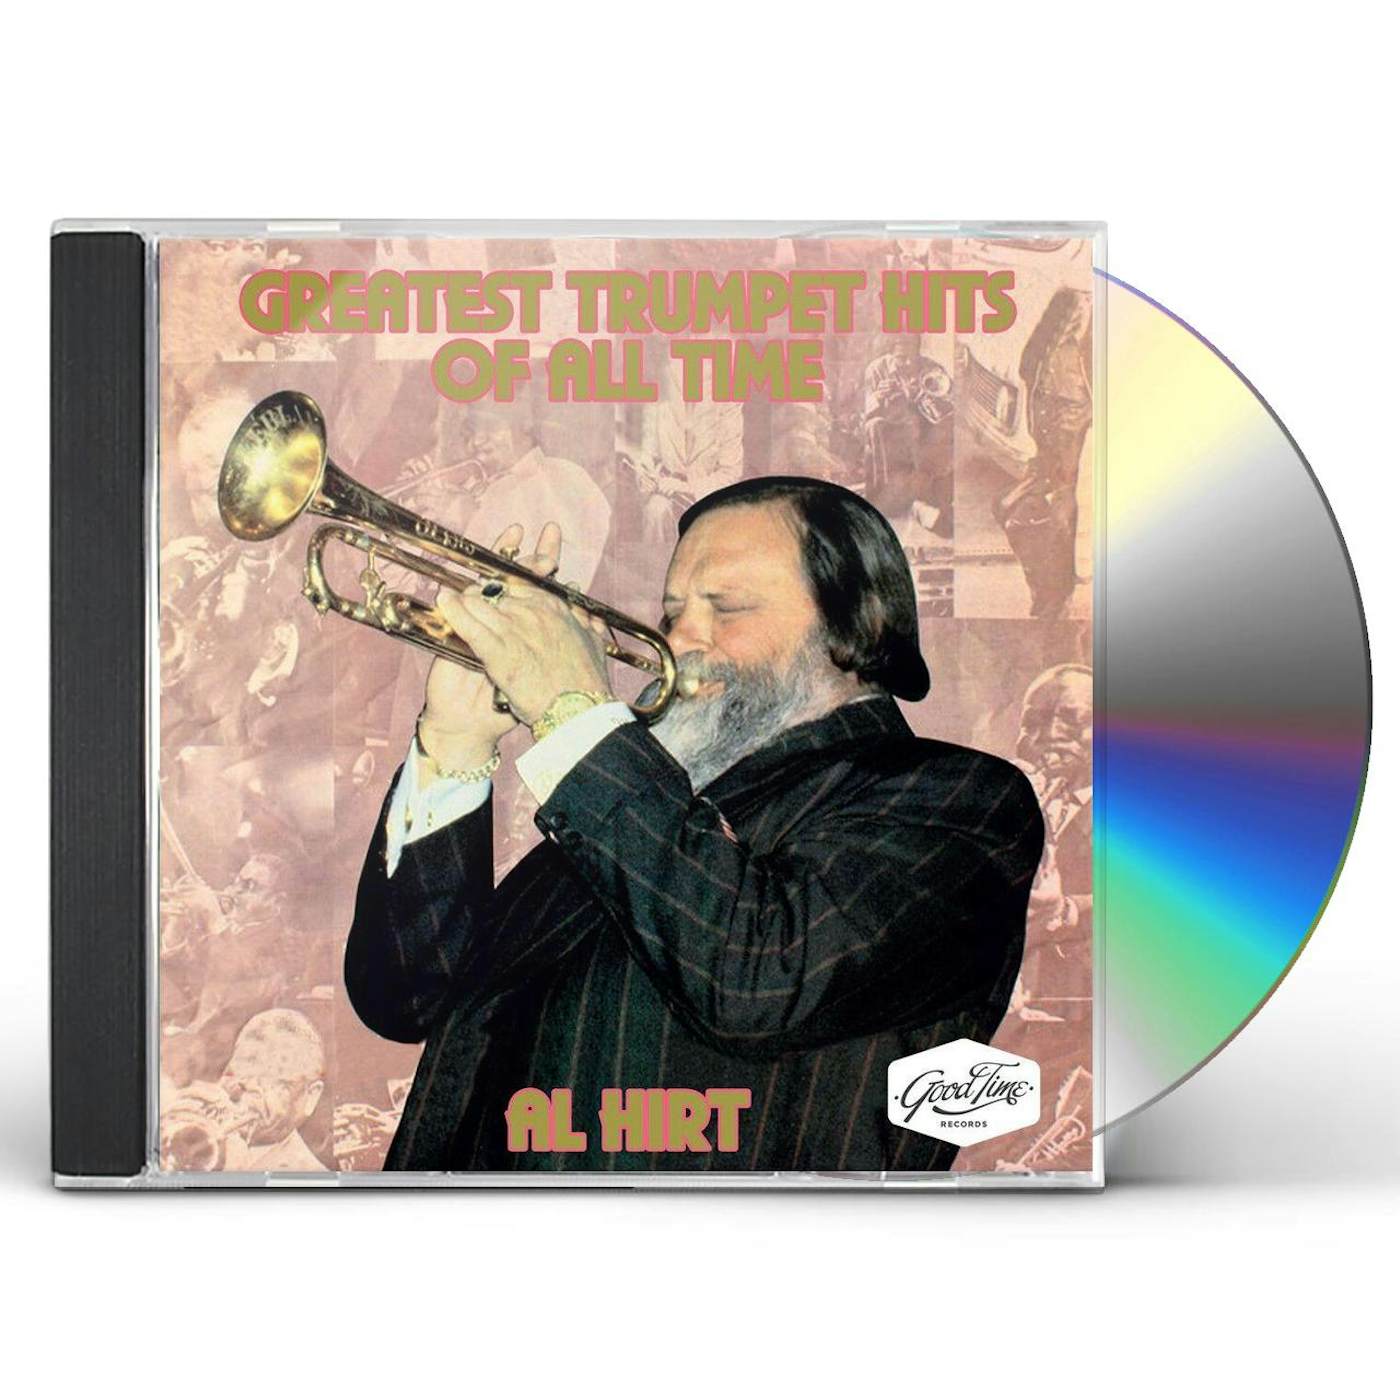 Al Hirt GREATEST TRUMPET HITS OF ALL TIME CD